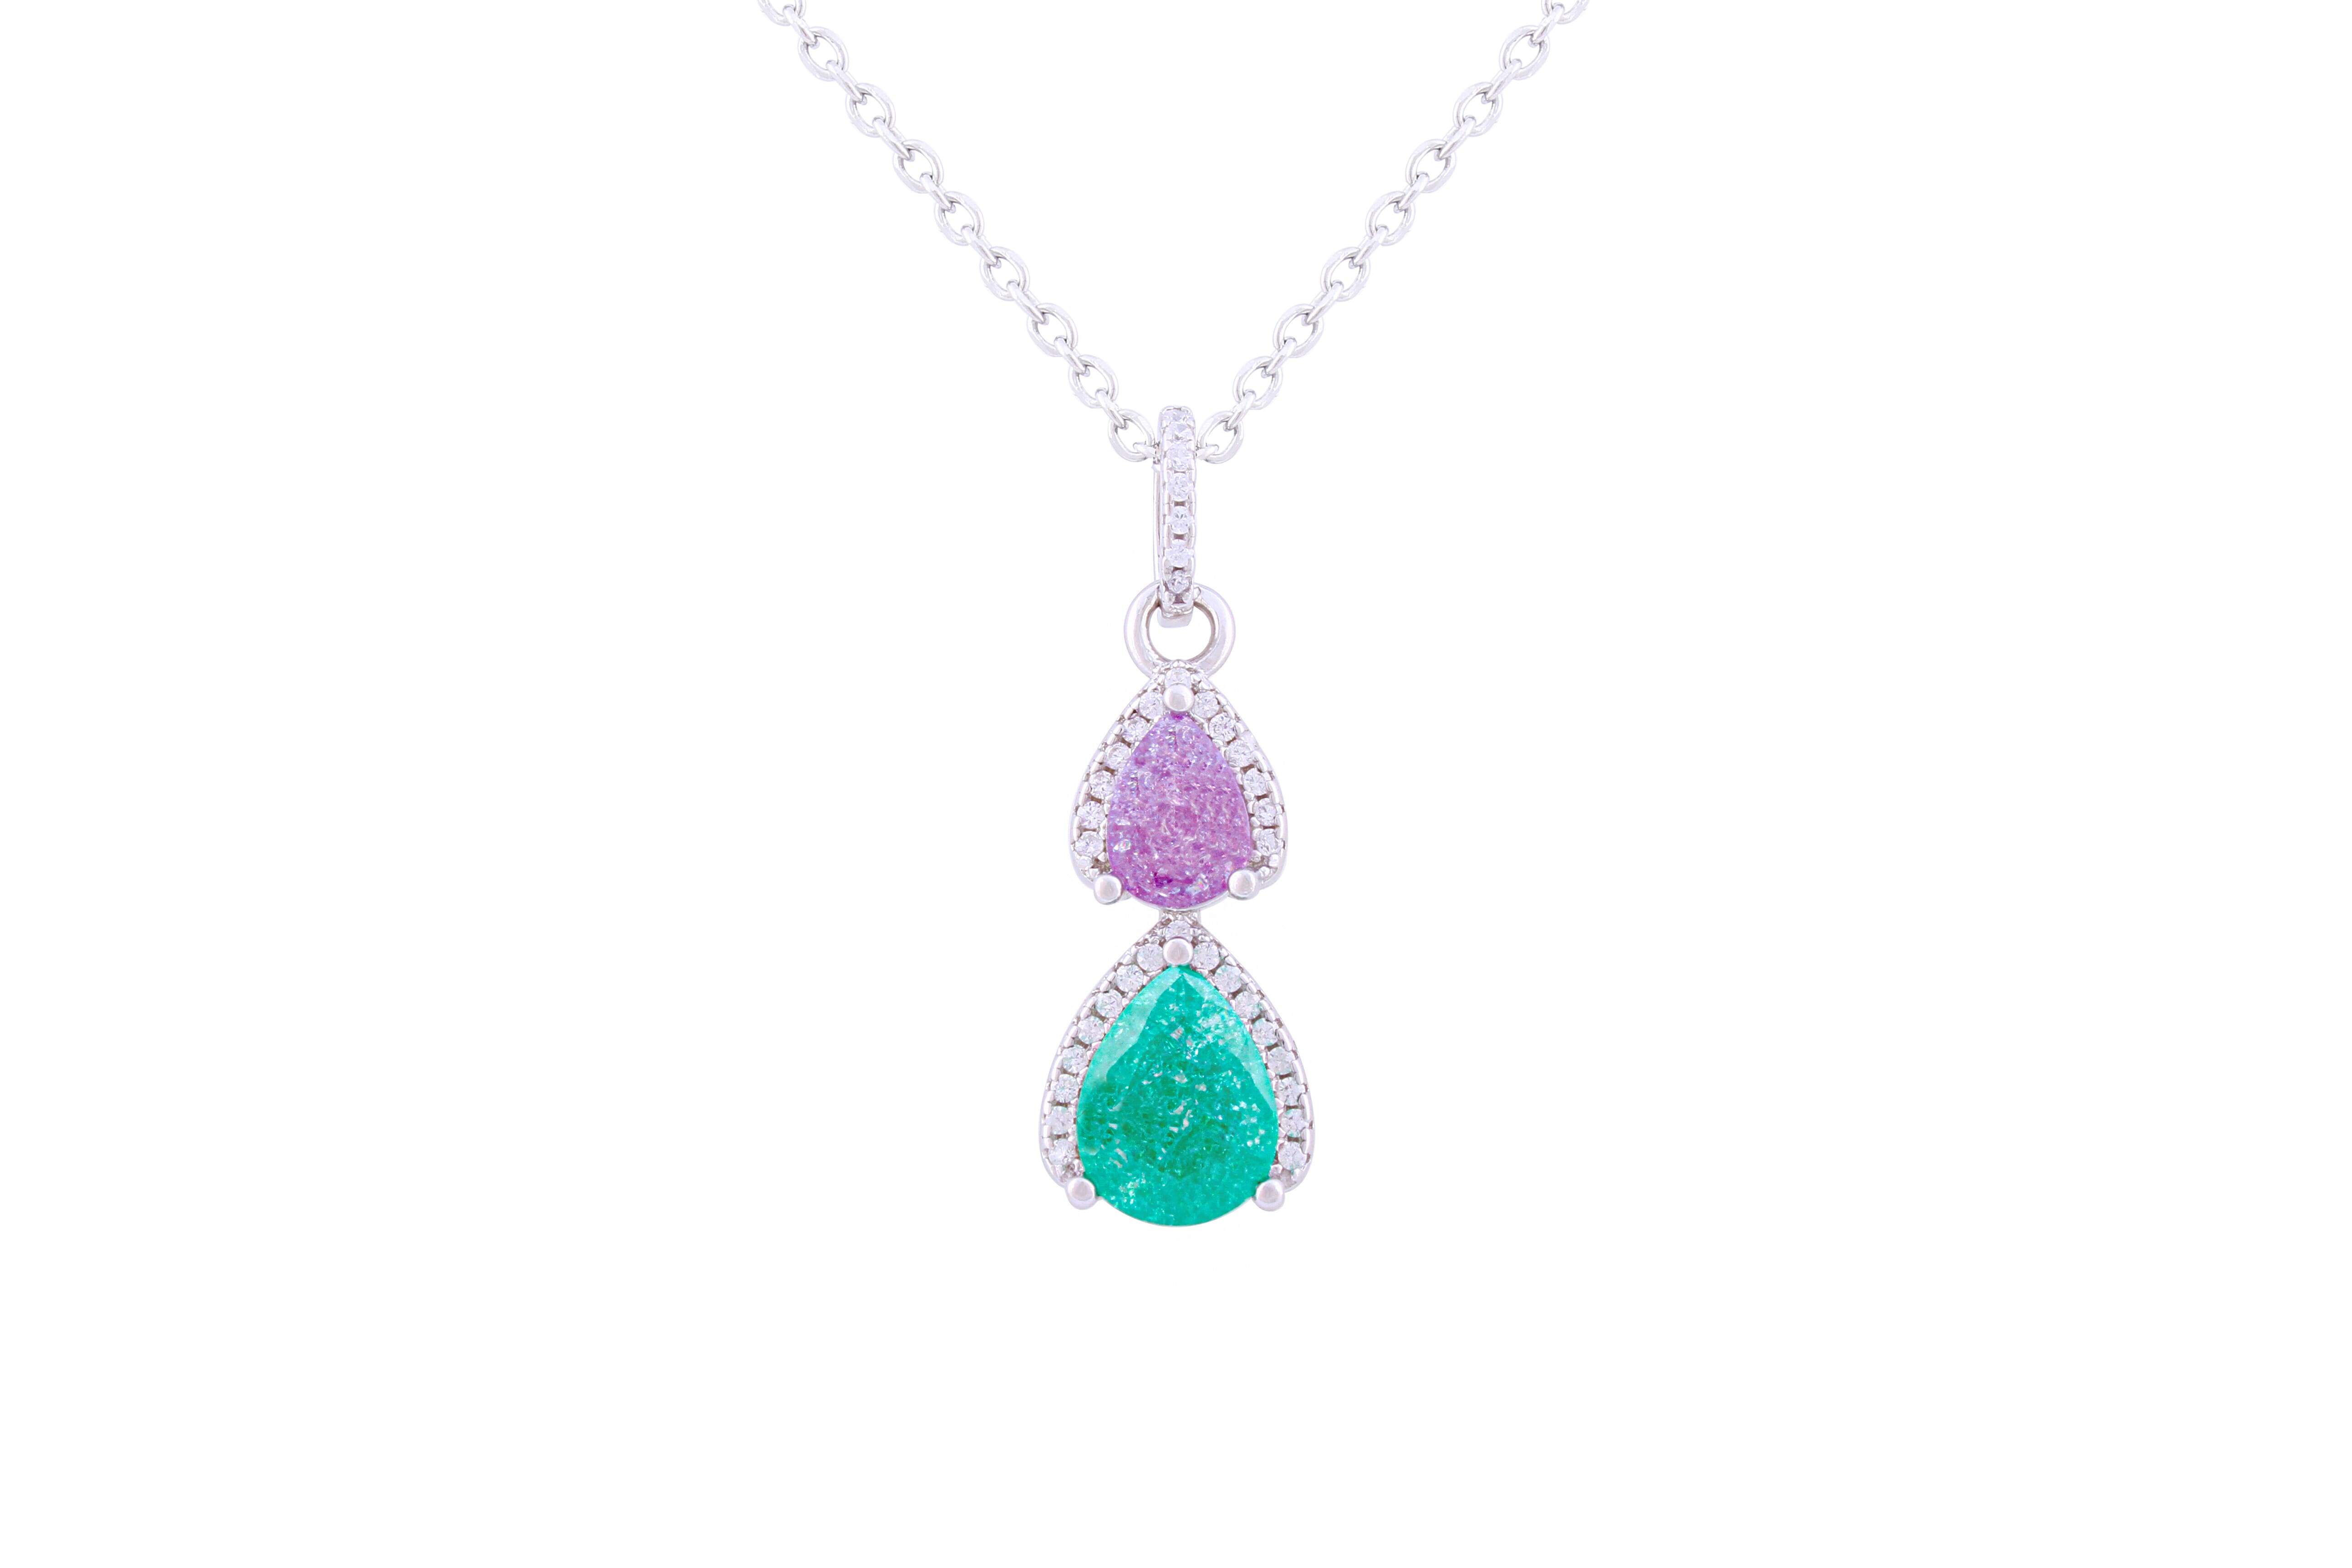 Asfour 925 Sterling Silver Necklace With Tenzanite & Green Pear Pendant NR0499-GN-A